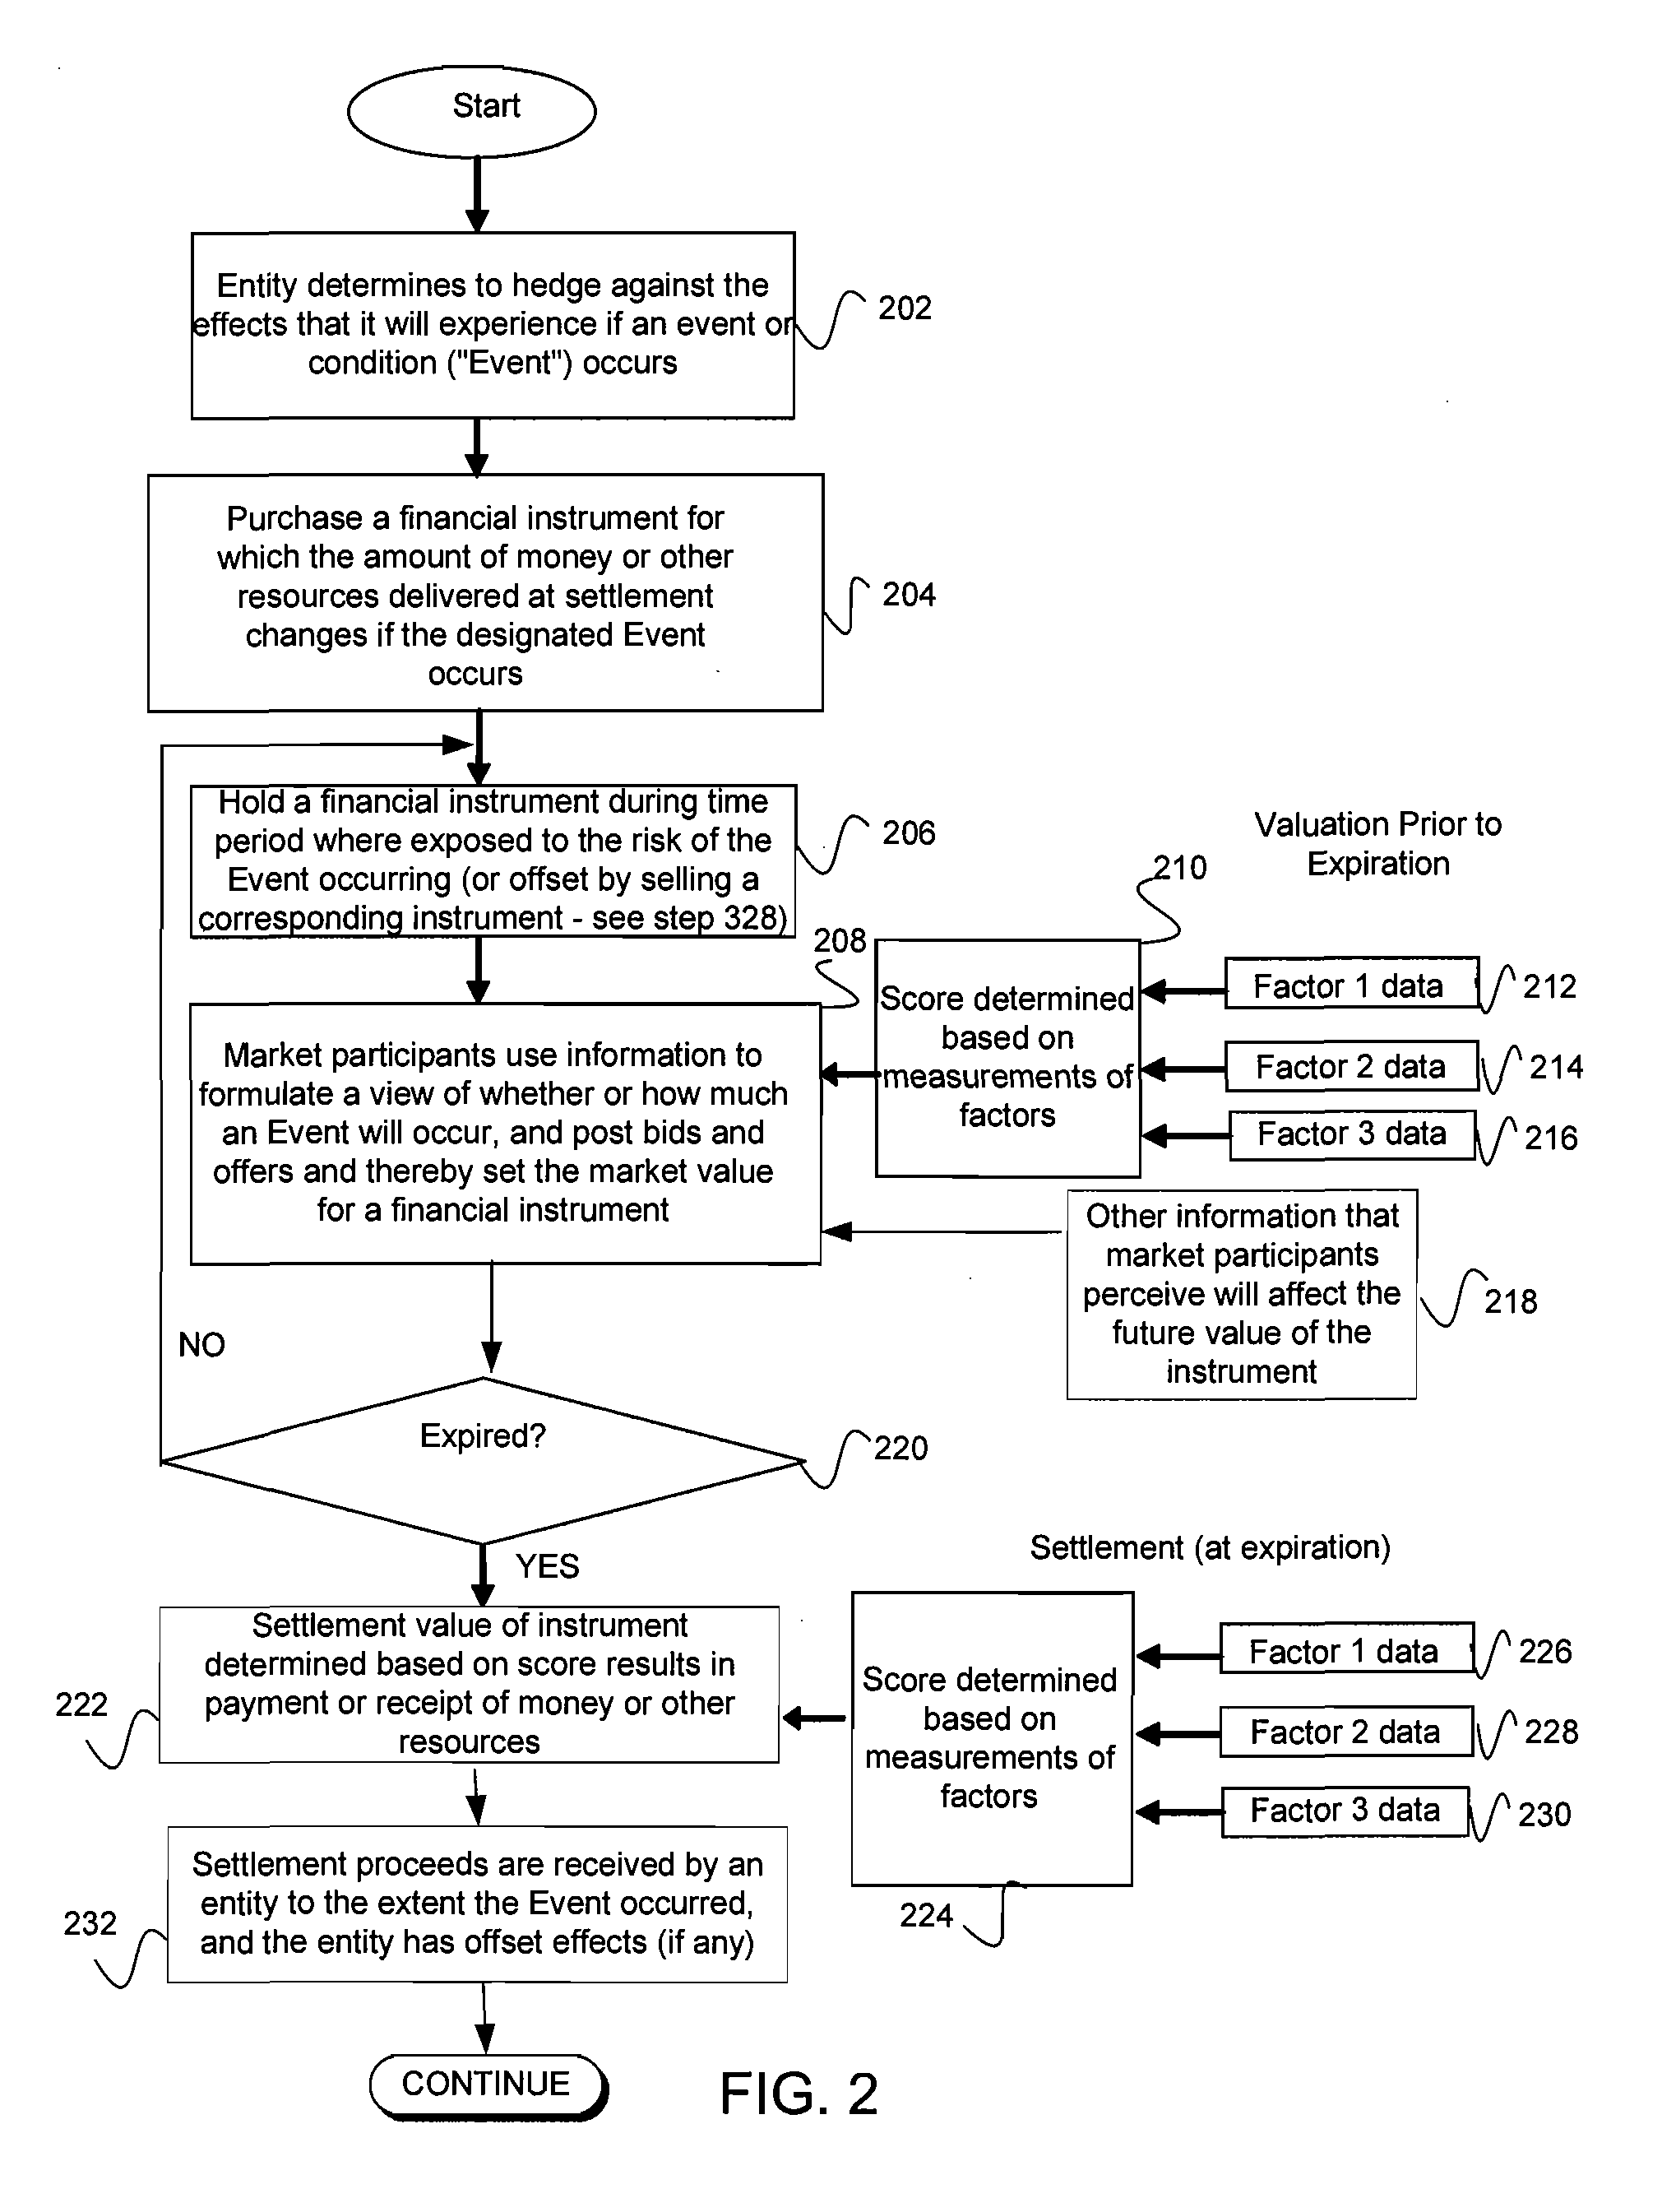 System, method and media for trading of event-linked derivative instruments